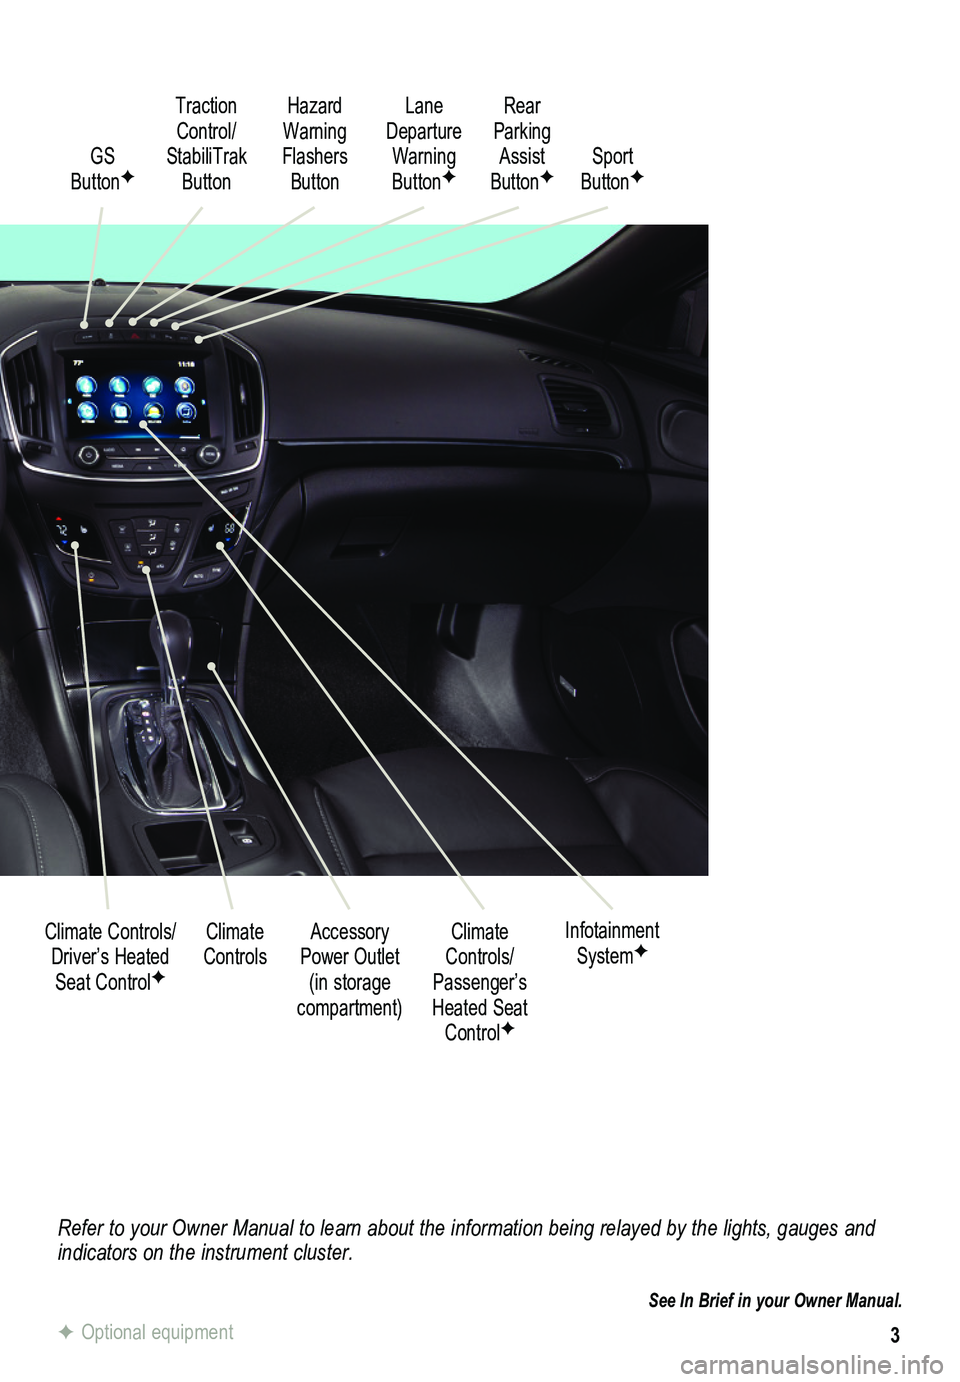 BUICK REGAL 2015  Get To Know Guide 3
Refer to your Owner Manual to learn about the information being relayed \
by the lights, gauges and indicators on the instrument cluster.
See In Brief in your Owner Manual.
GS ButtonF
Accessory Powe